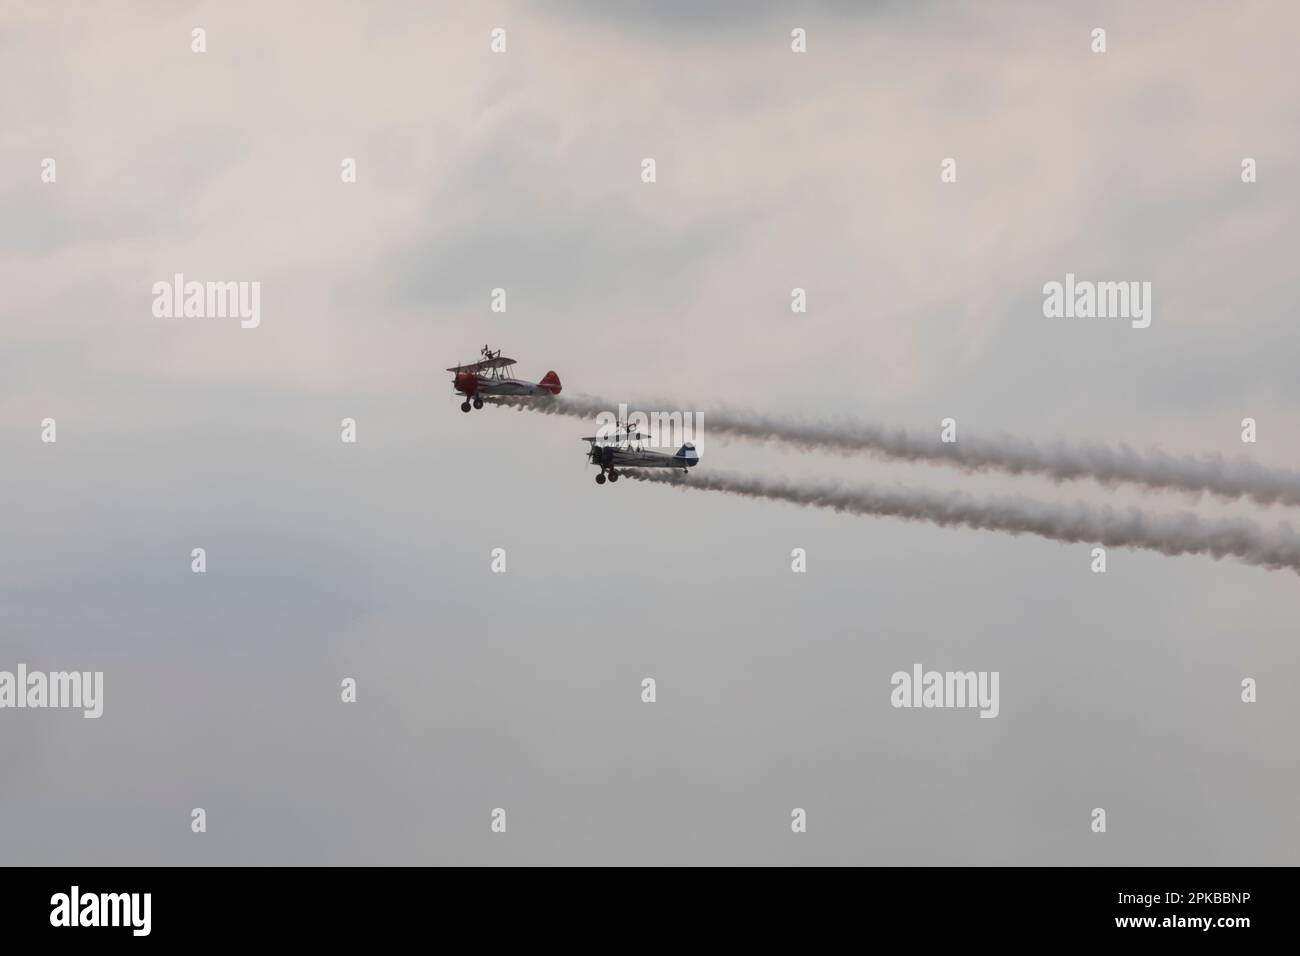 Angleterre, Dorset, Bournemouth, The Annual Air Show, planes in Flight Banque D'Images